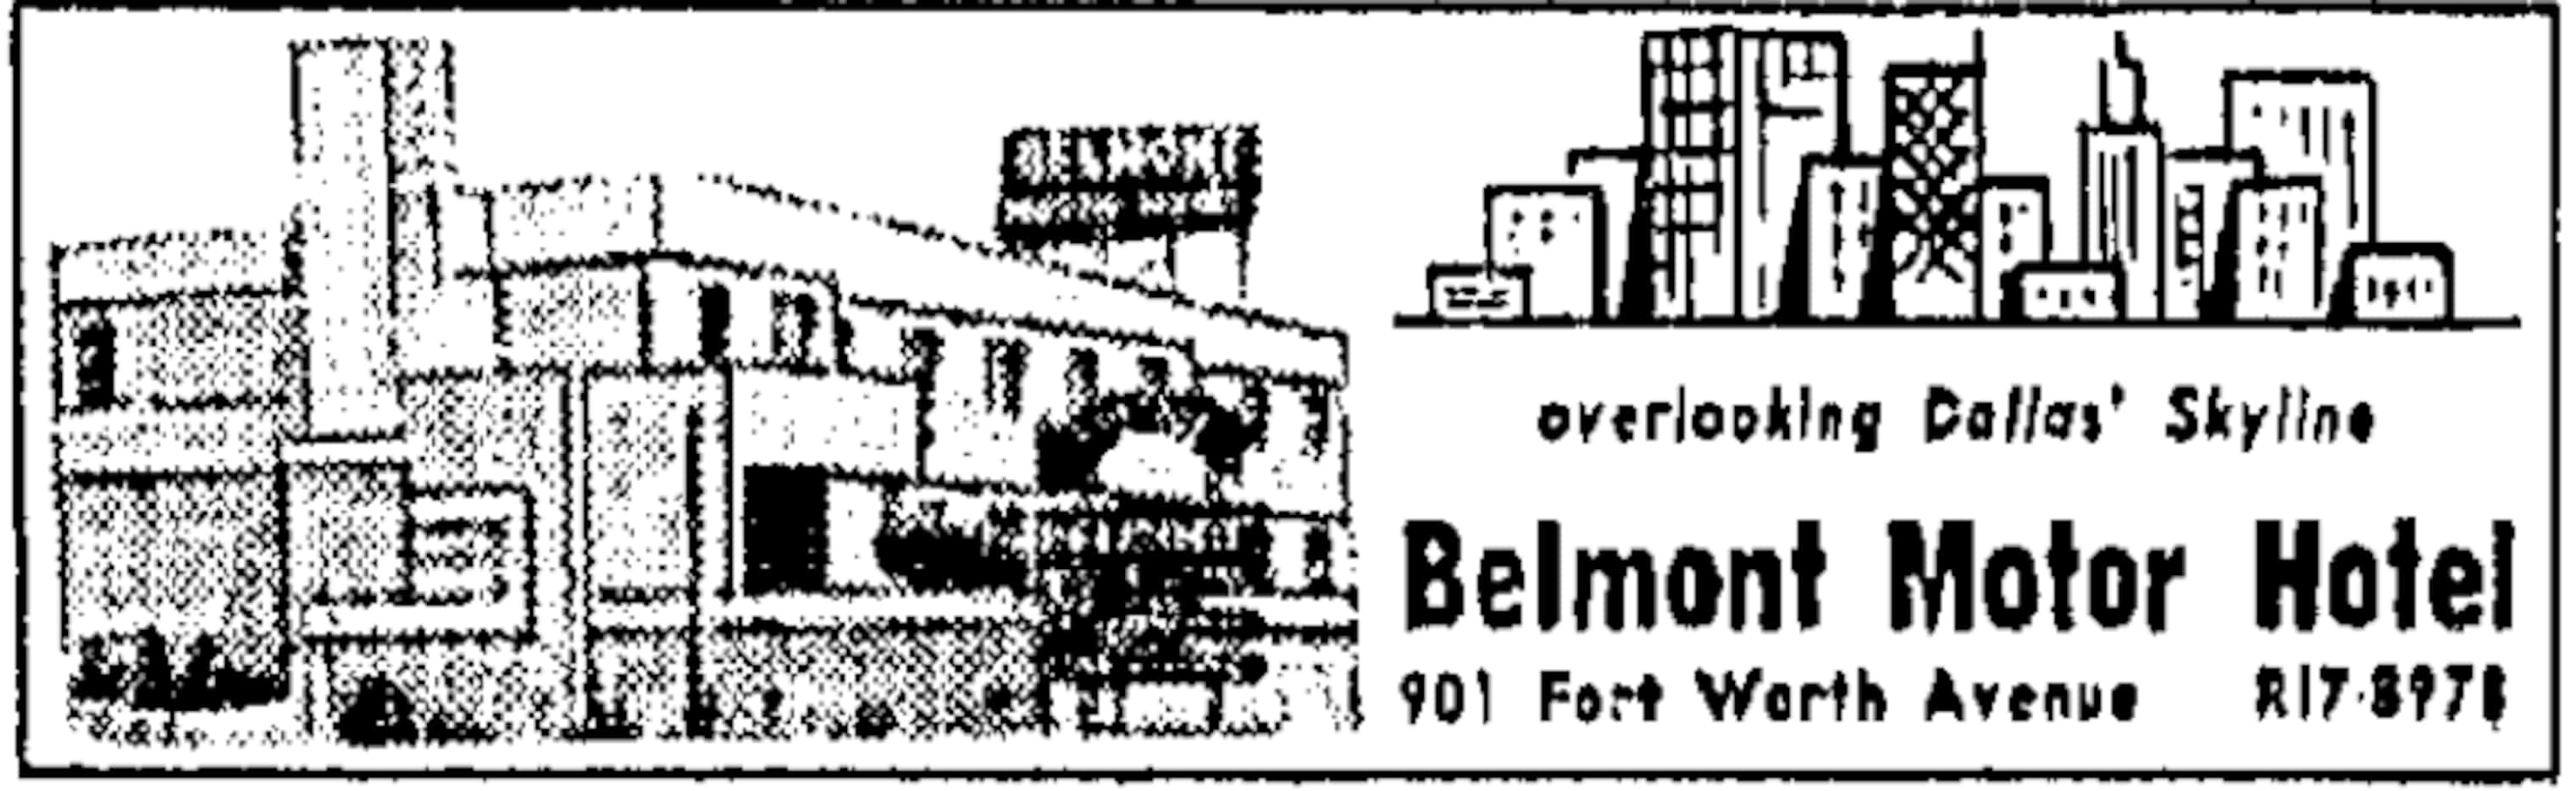 An ad for the Belmont Hotel that ran in The Dallas Morning News on June 6, 1965